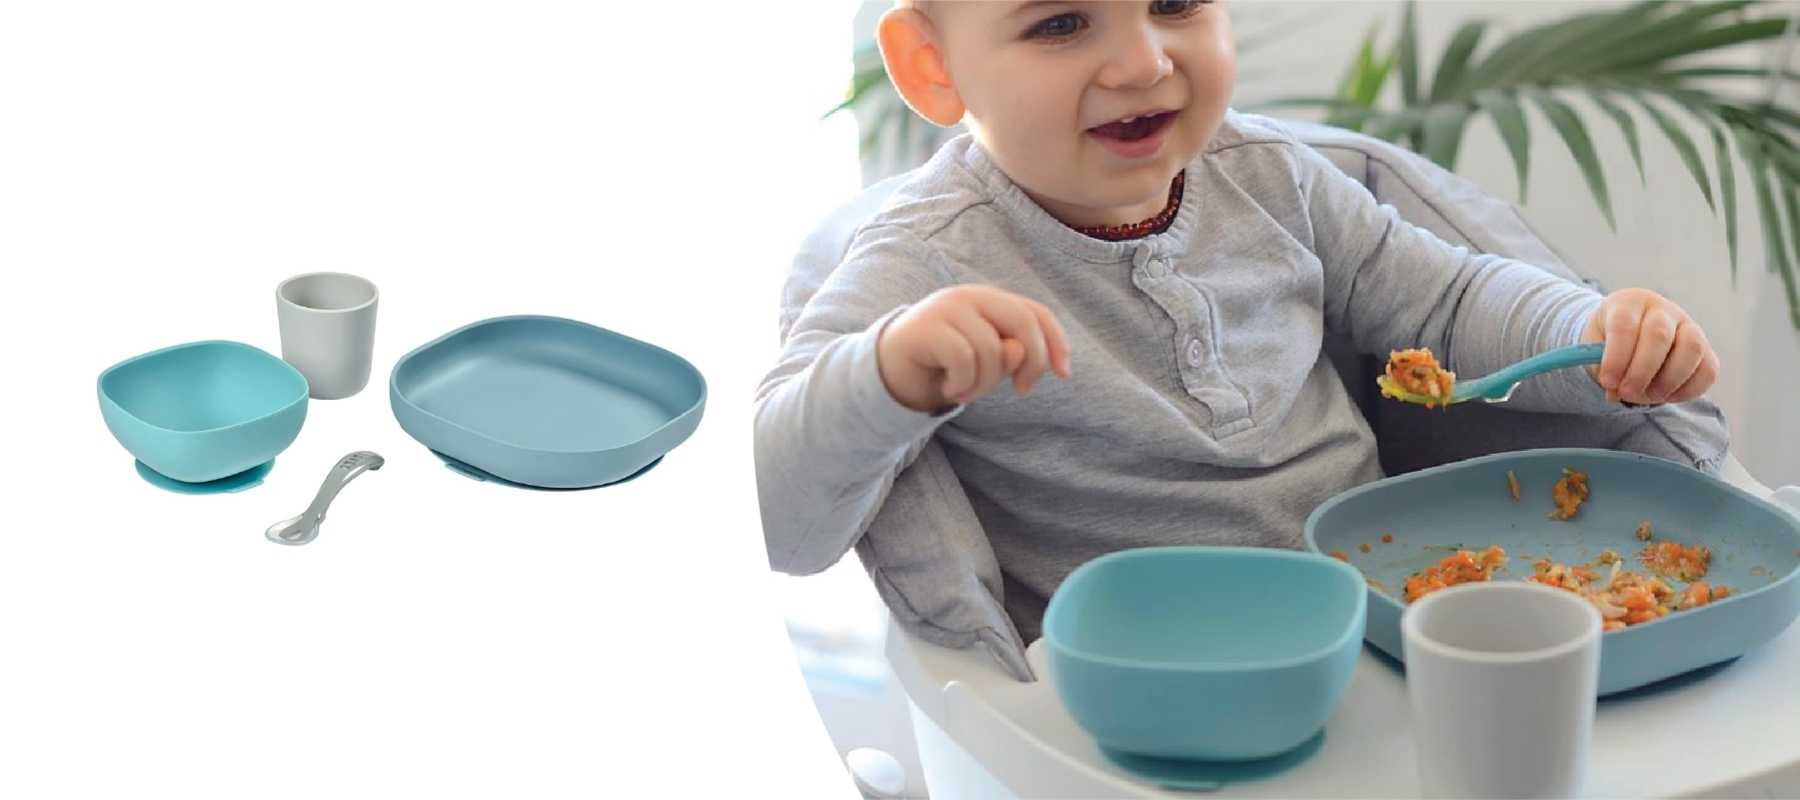 example of an meal sets for babies